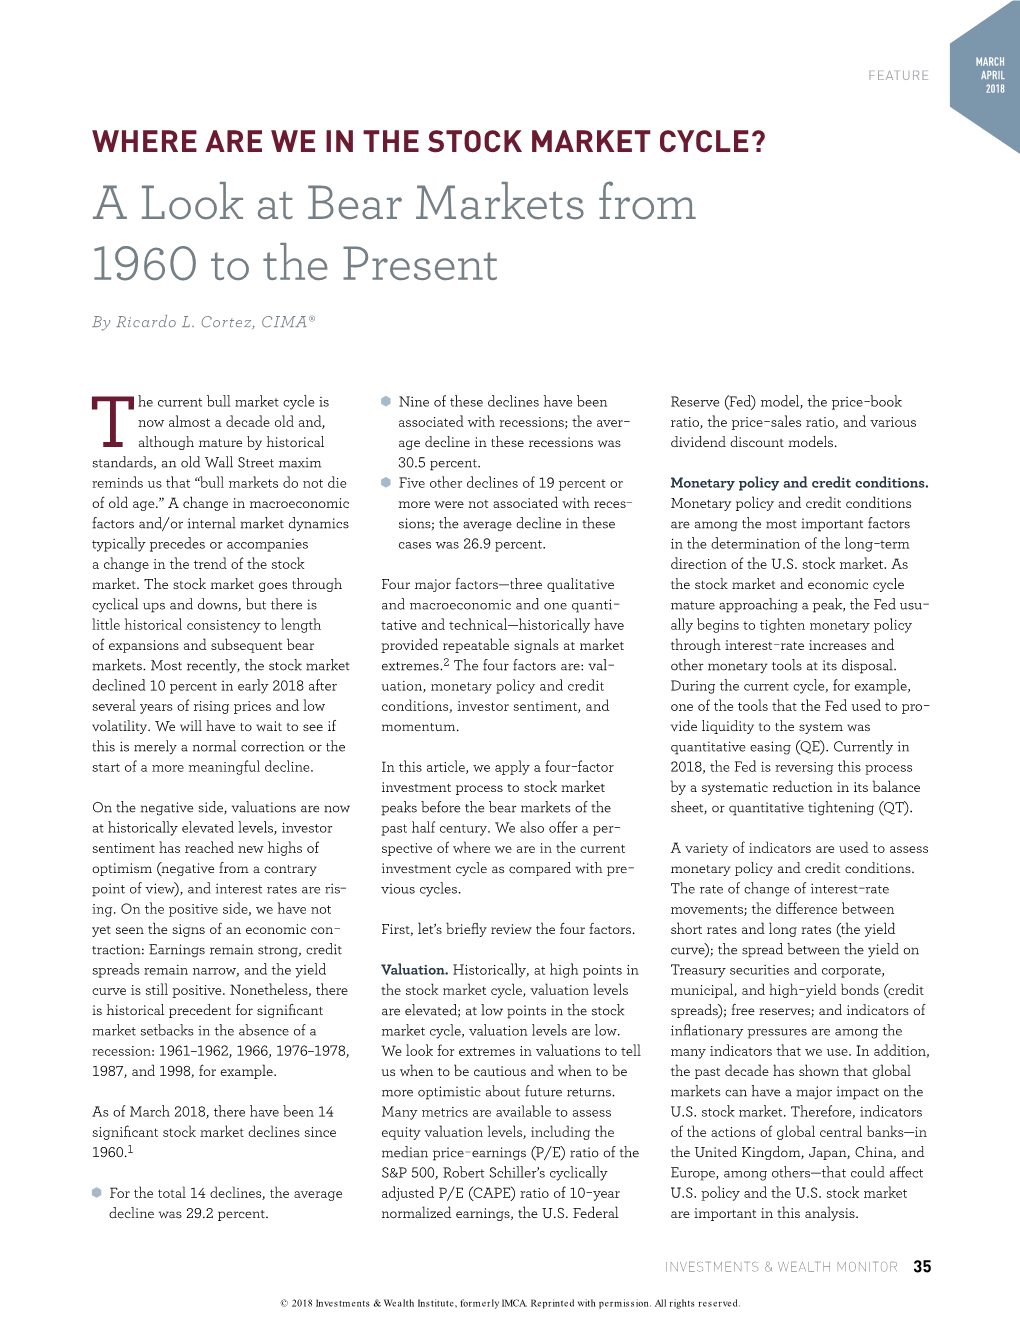 A Look at Bear Markets from 1960 to the Present